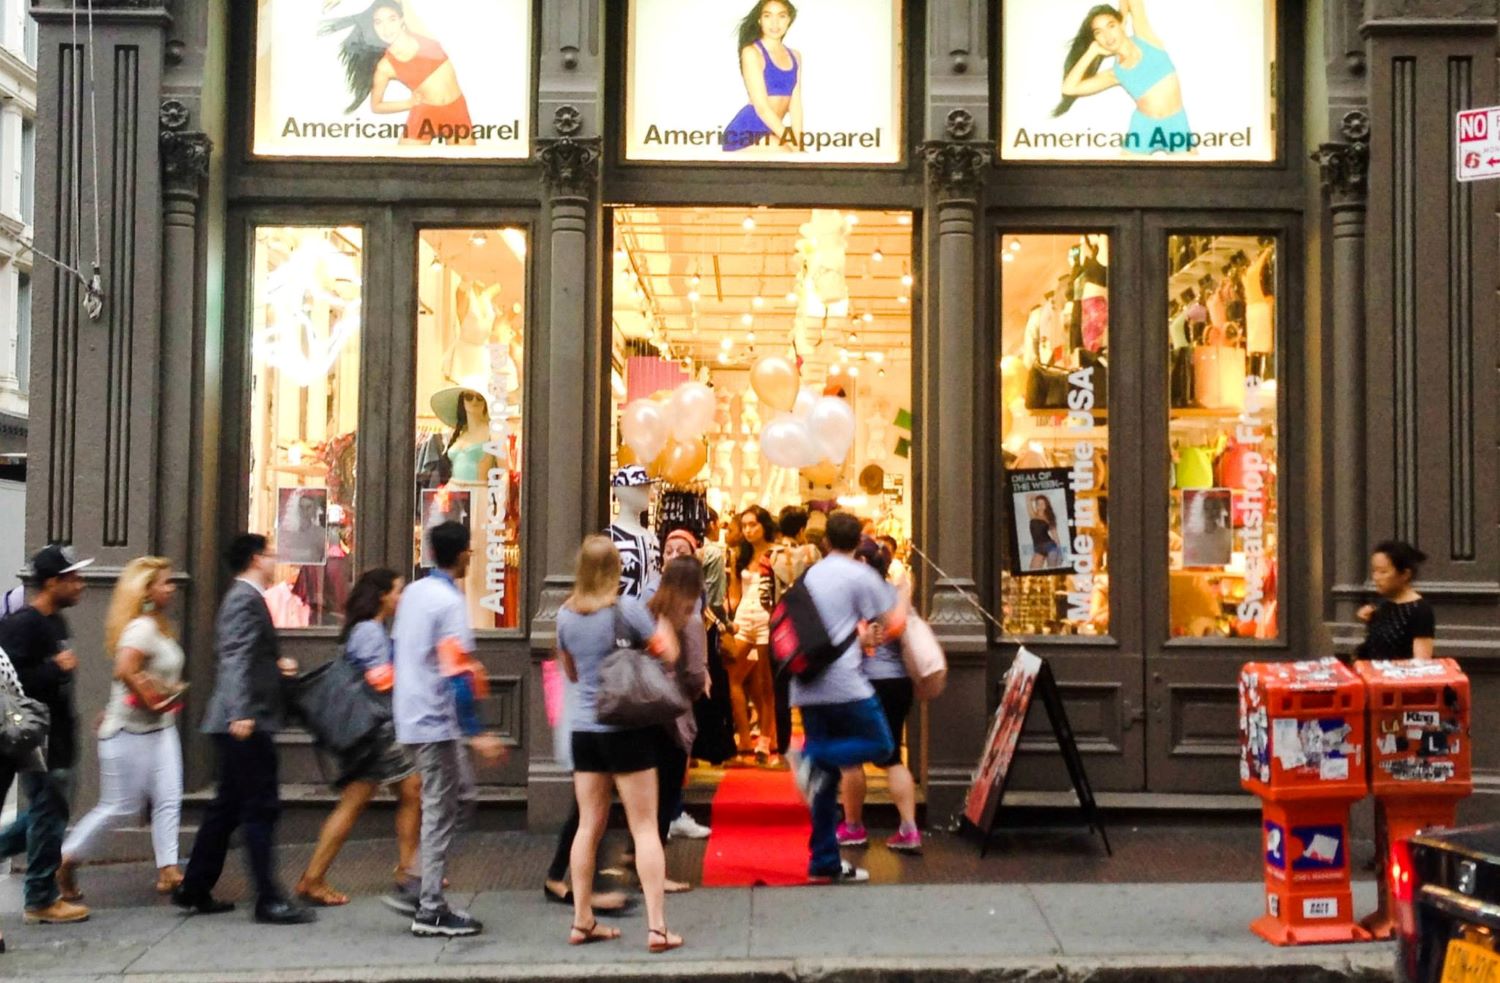 Shoppers visit American Apparel in NY